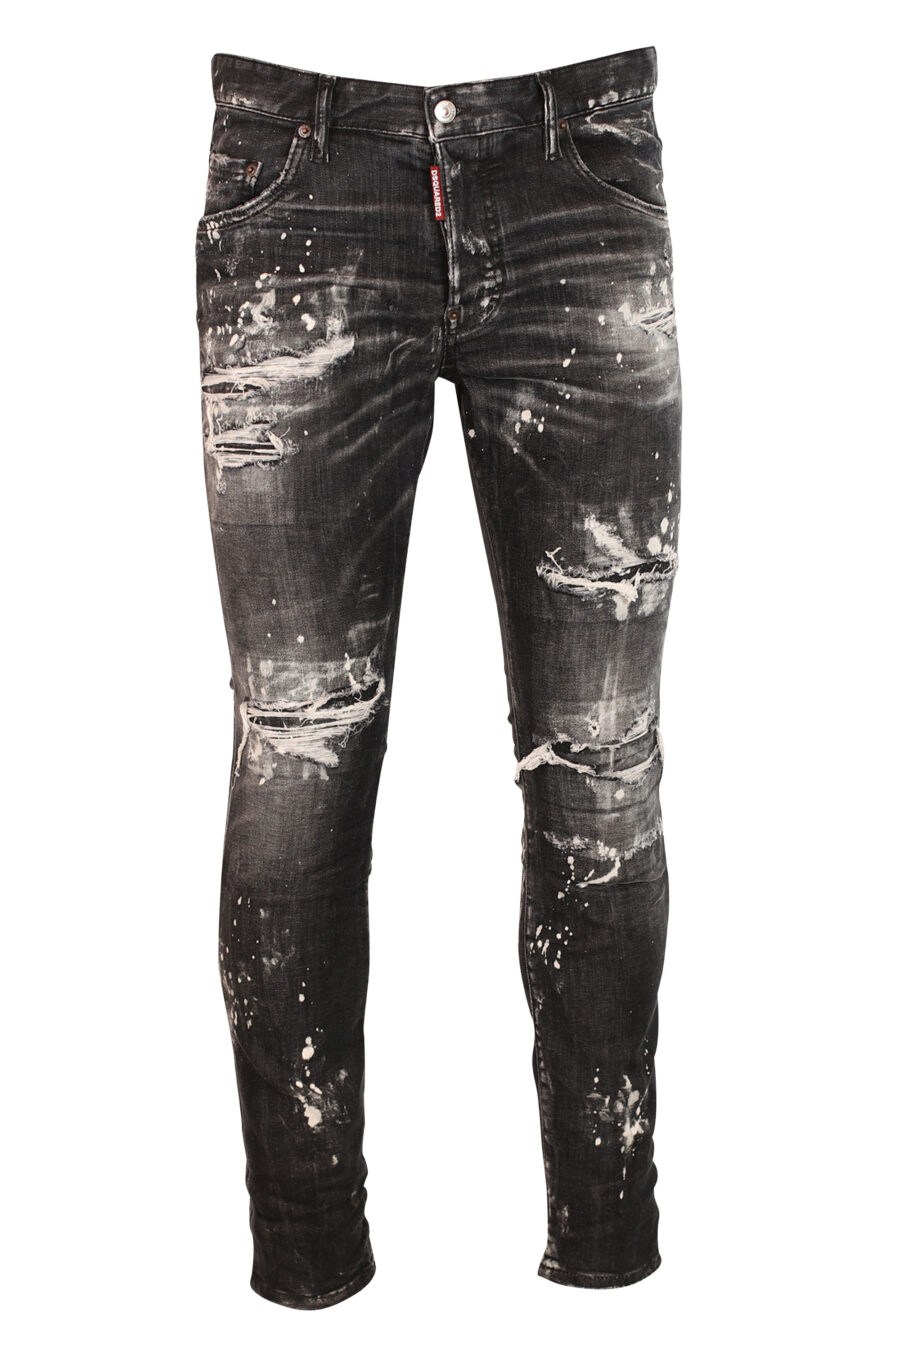 Skater jean trousers black worn out with rips - 8052134938102